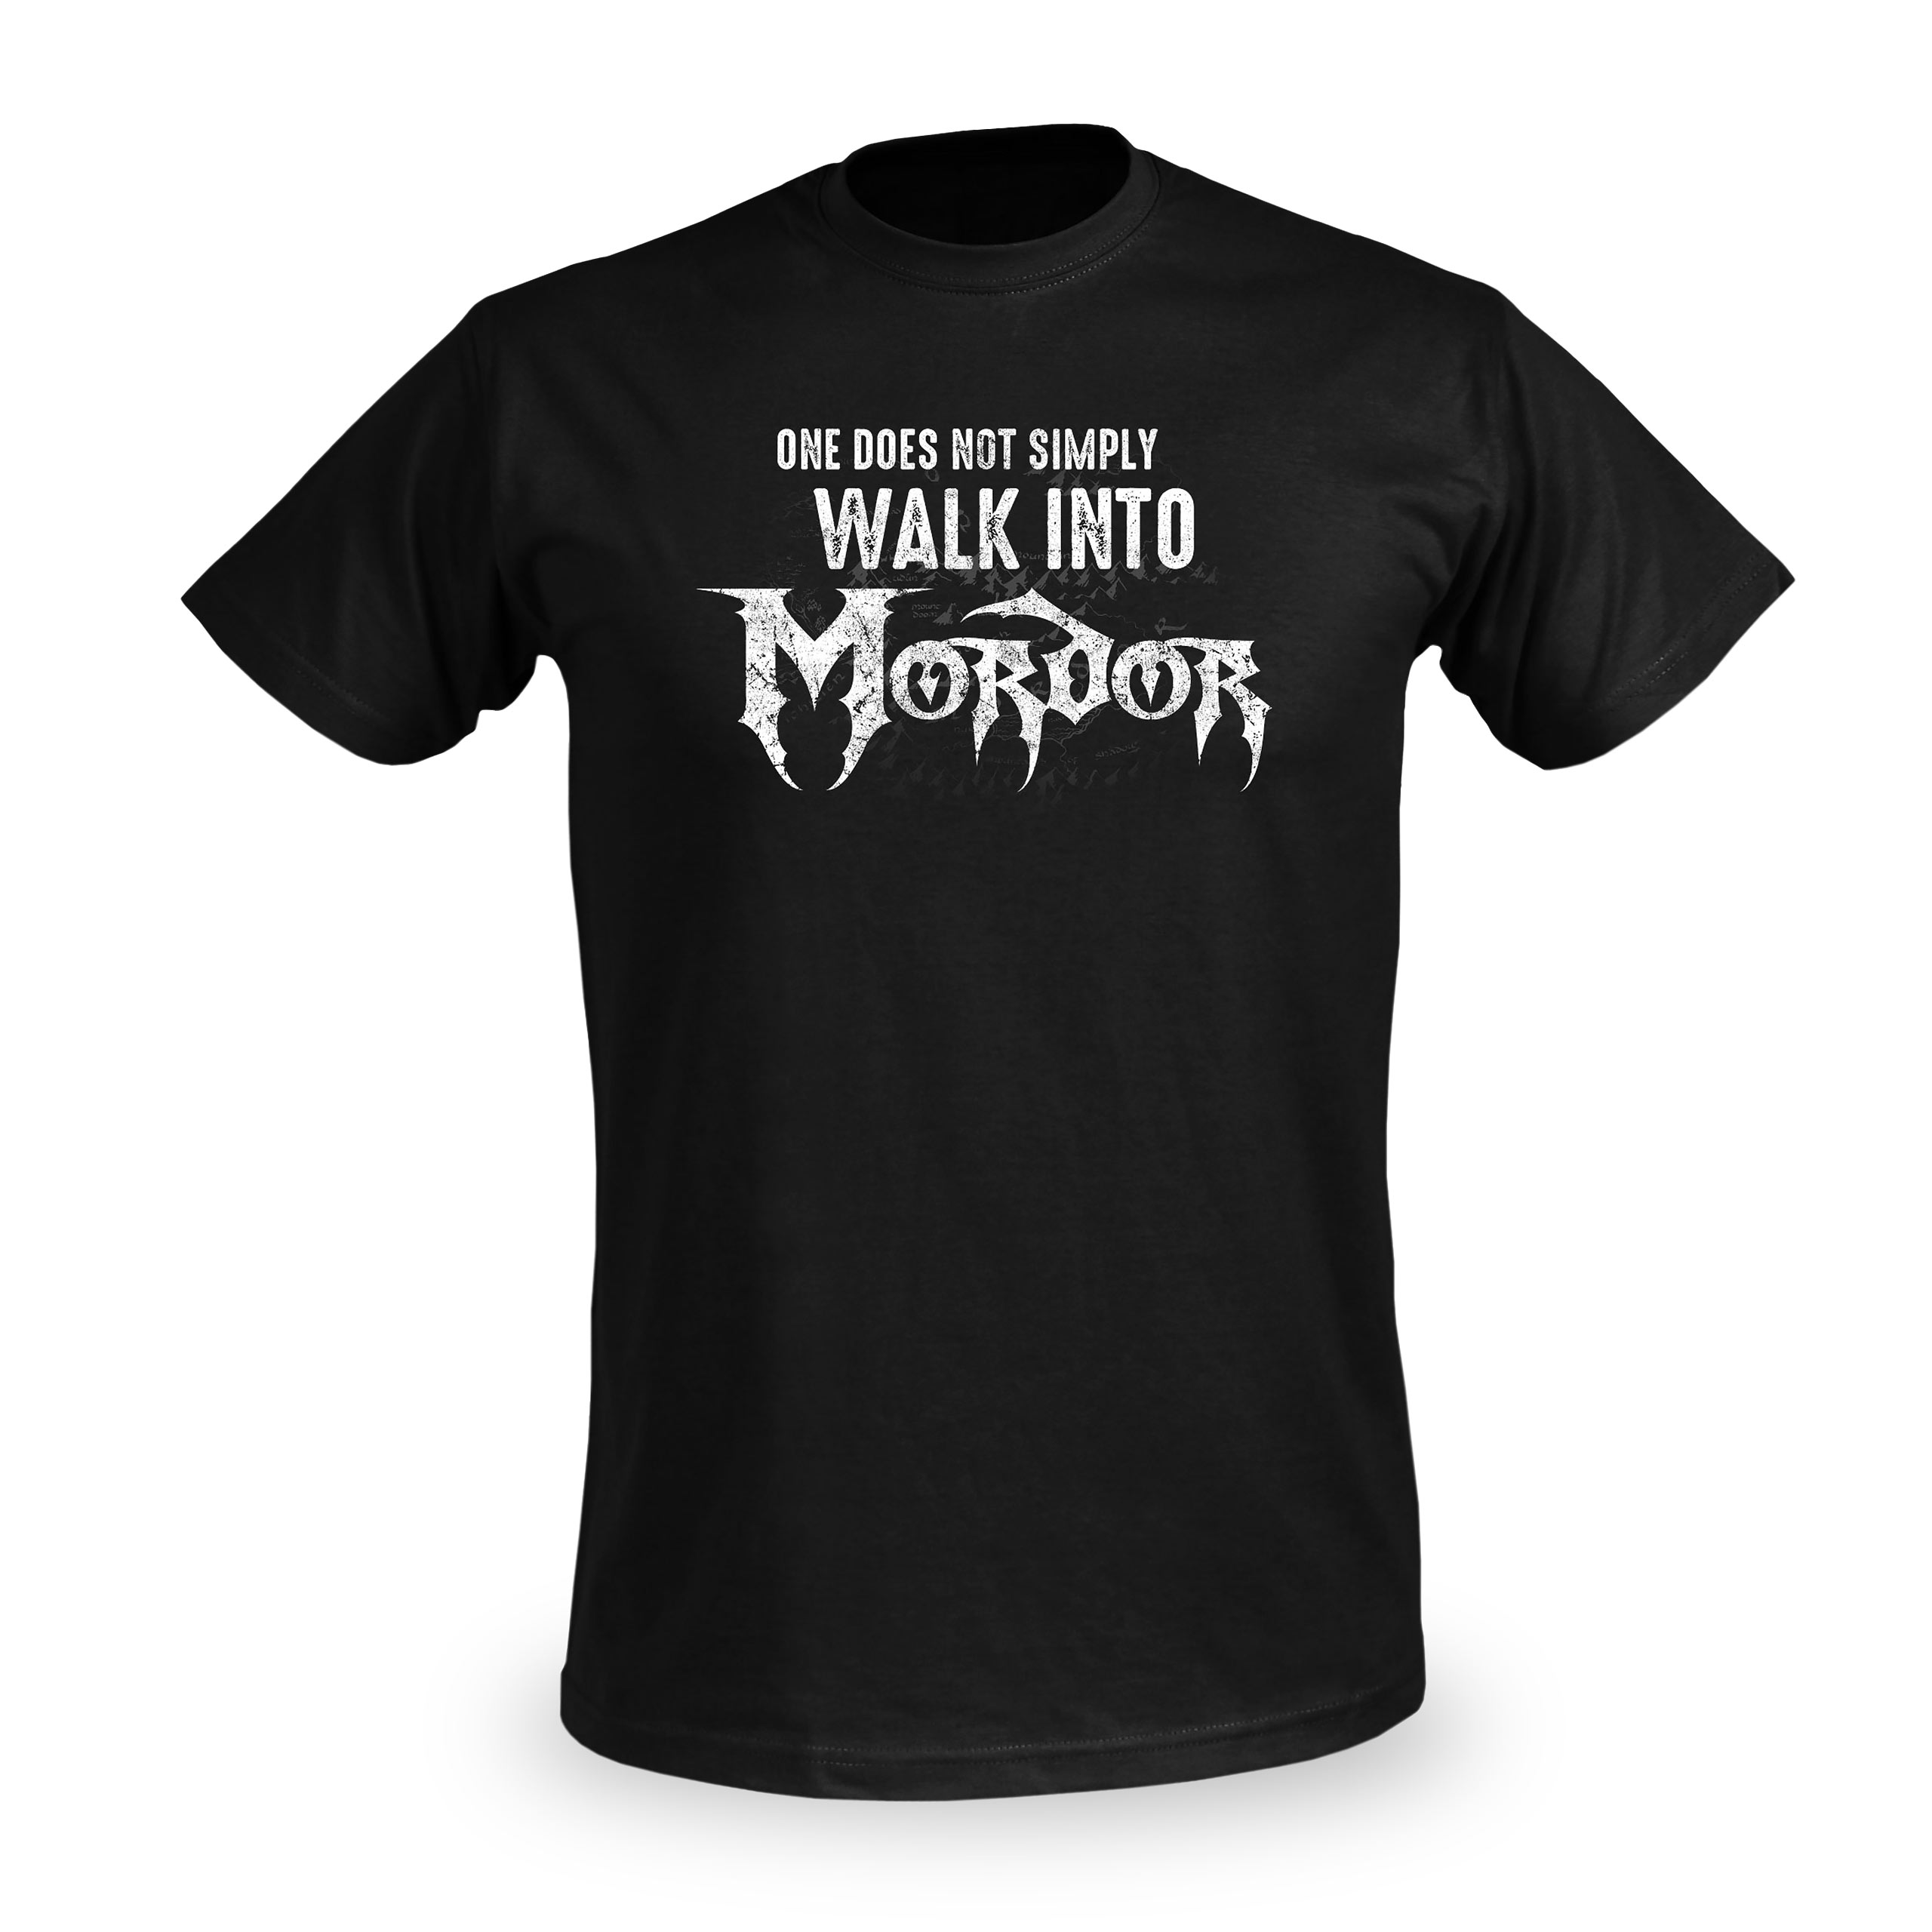 Lord of the Rings - Walk Into Mordor T-Shirt Black